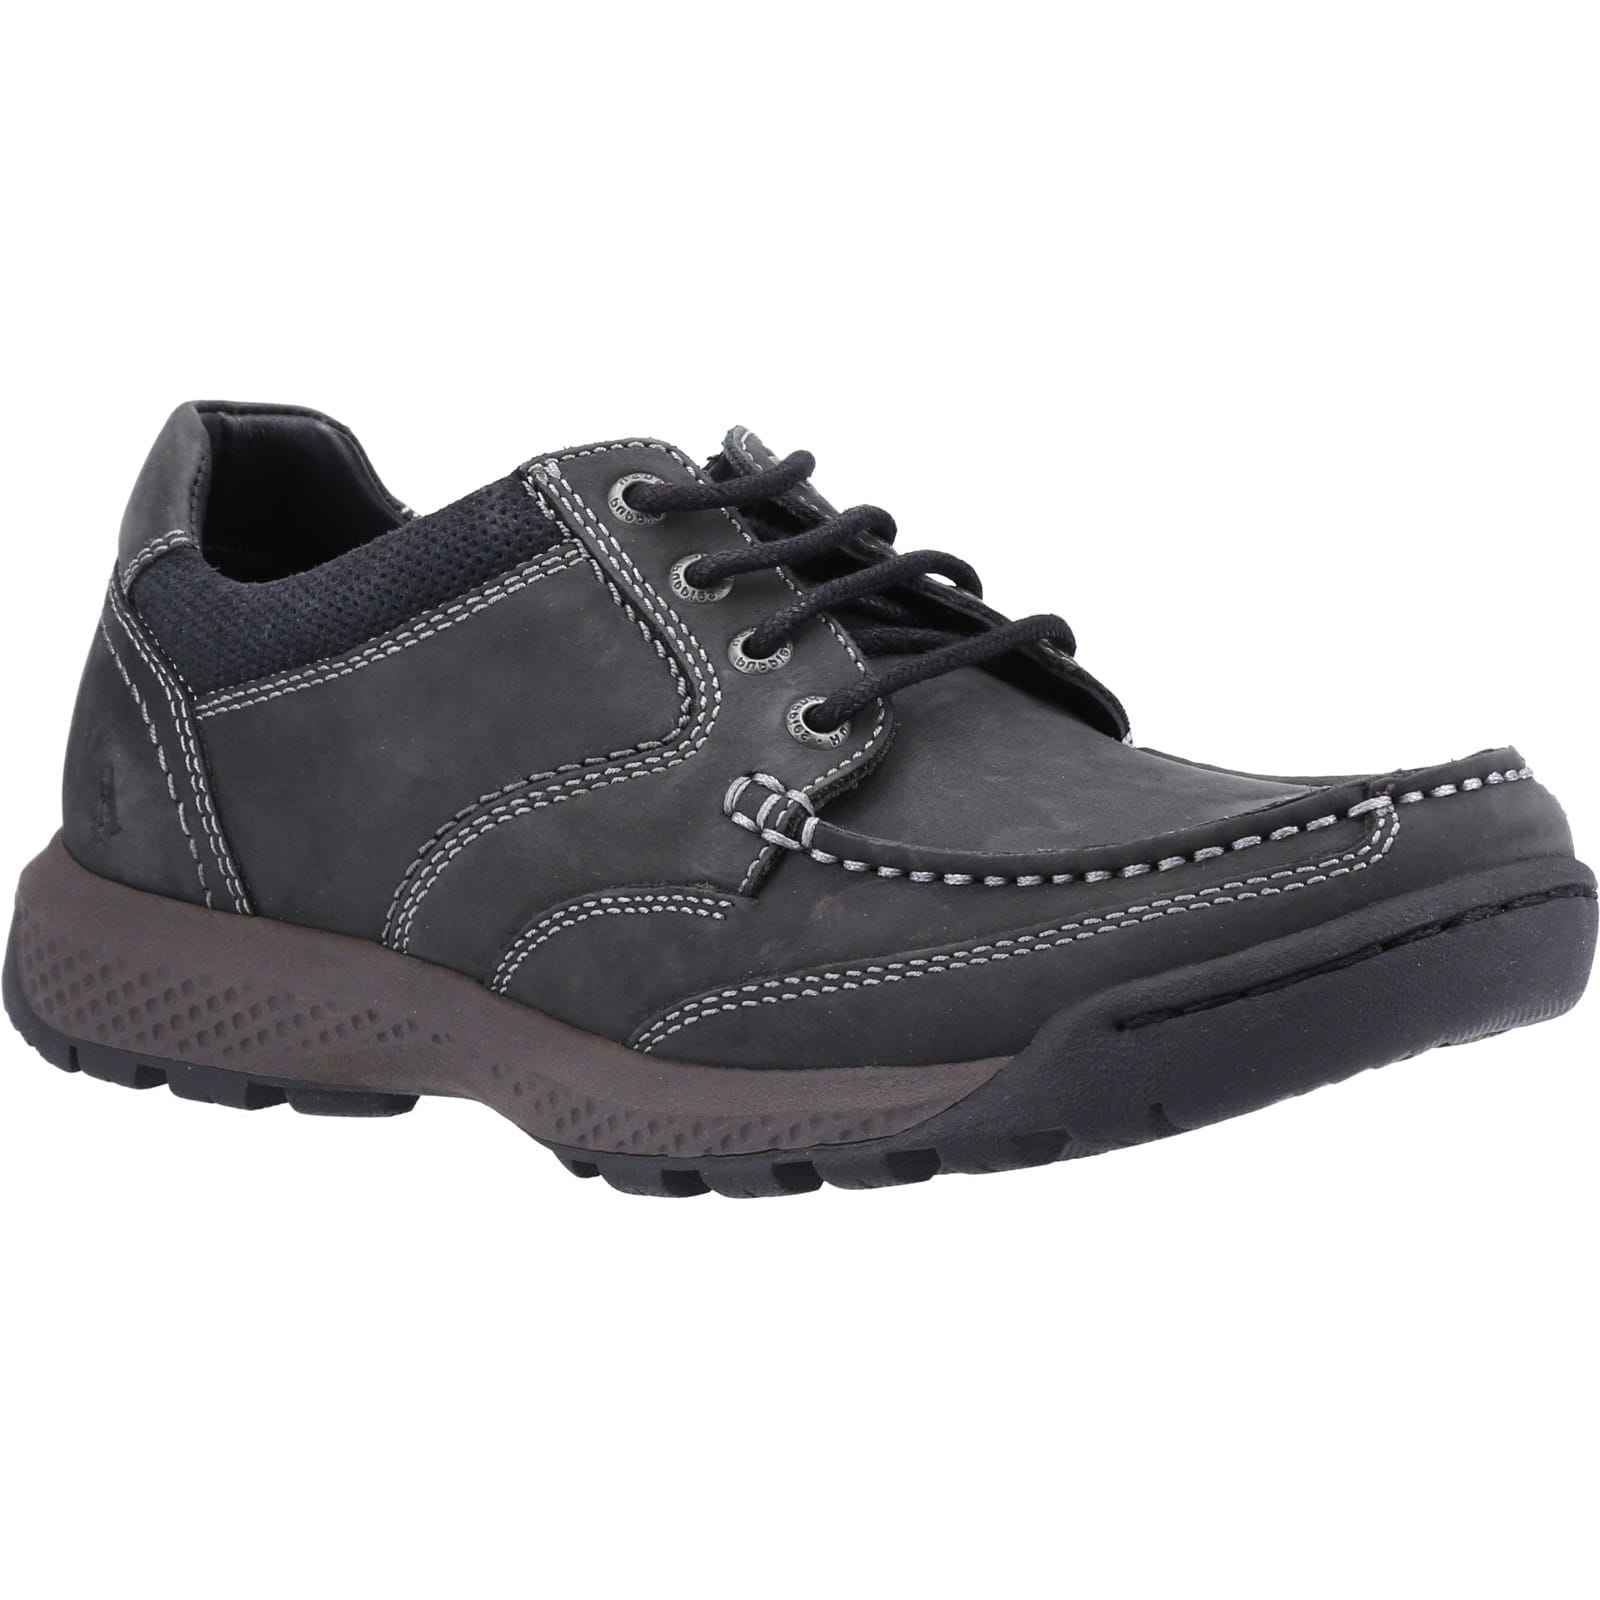 Hush Puppies Men's Dominic Lace Up Leather Shoes - UK 9